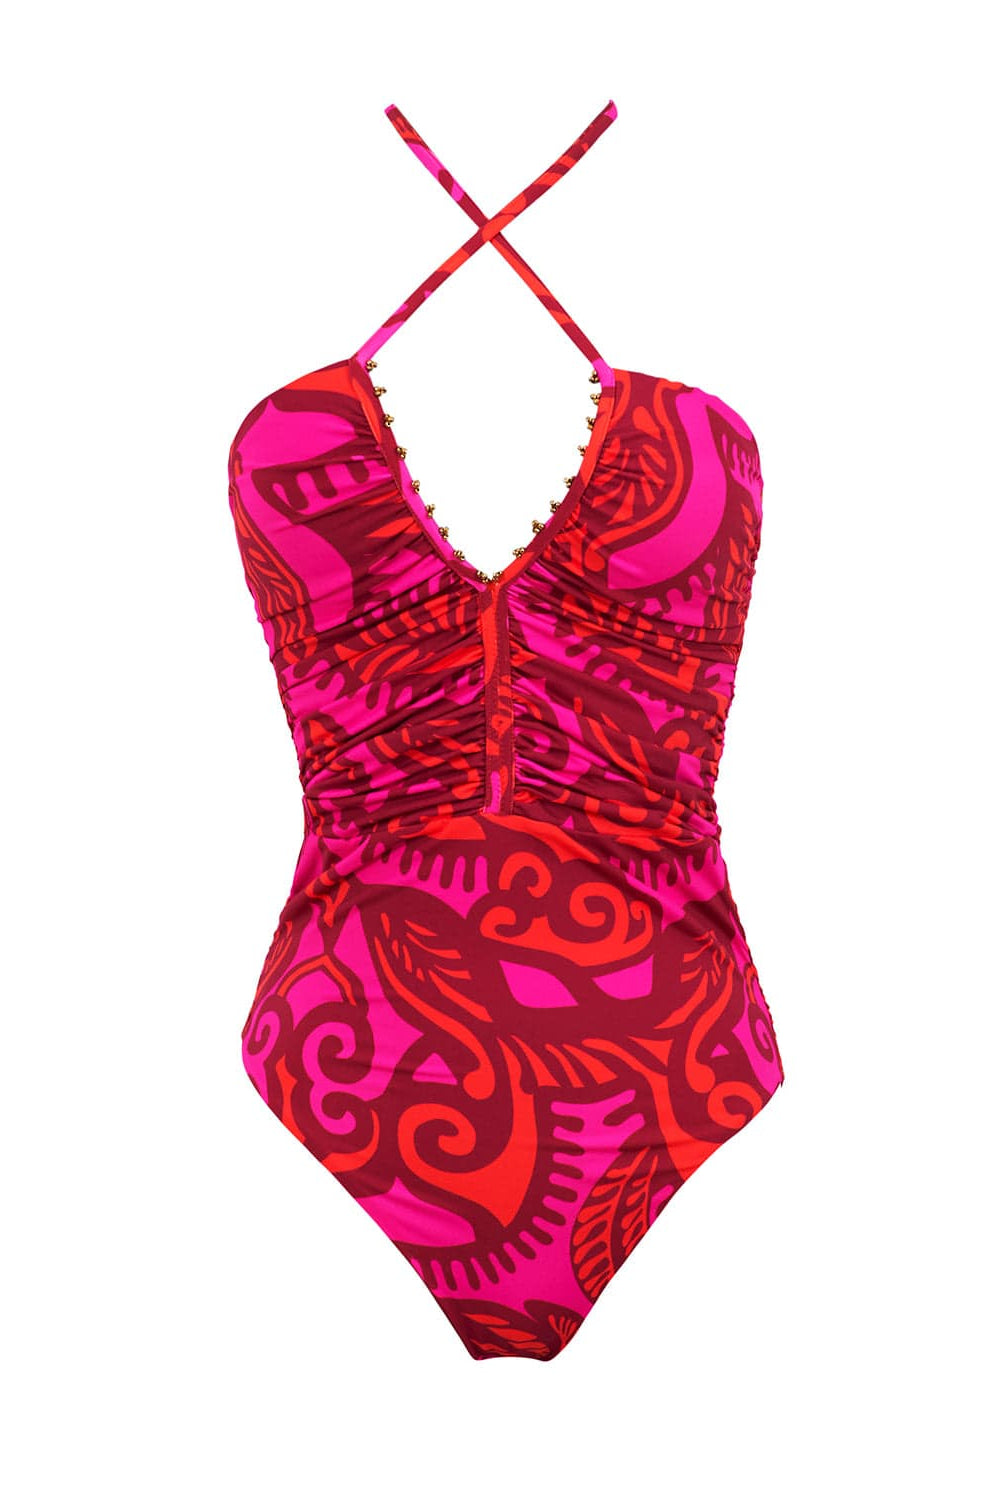 A pink & red one piece swim suit against a white wall.